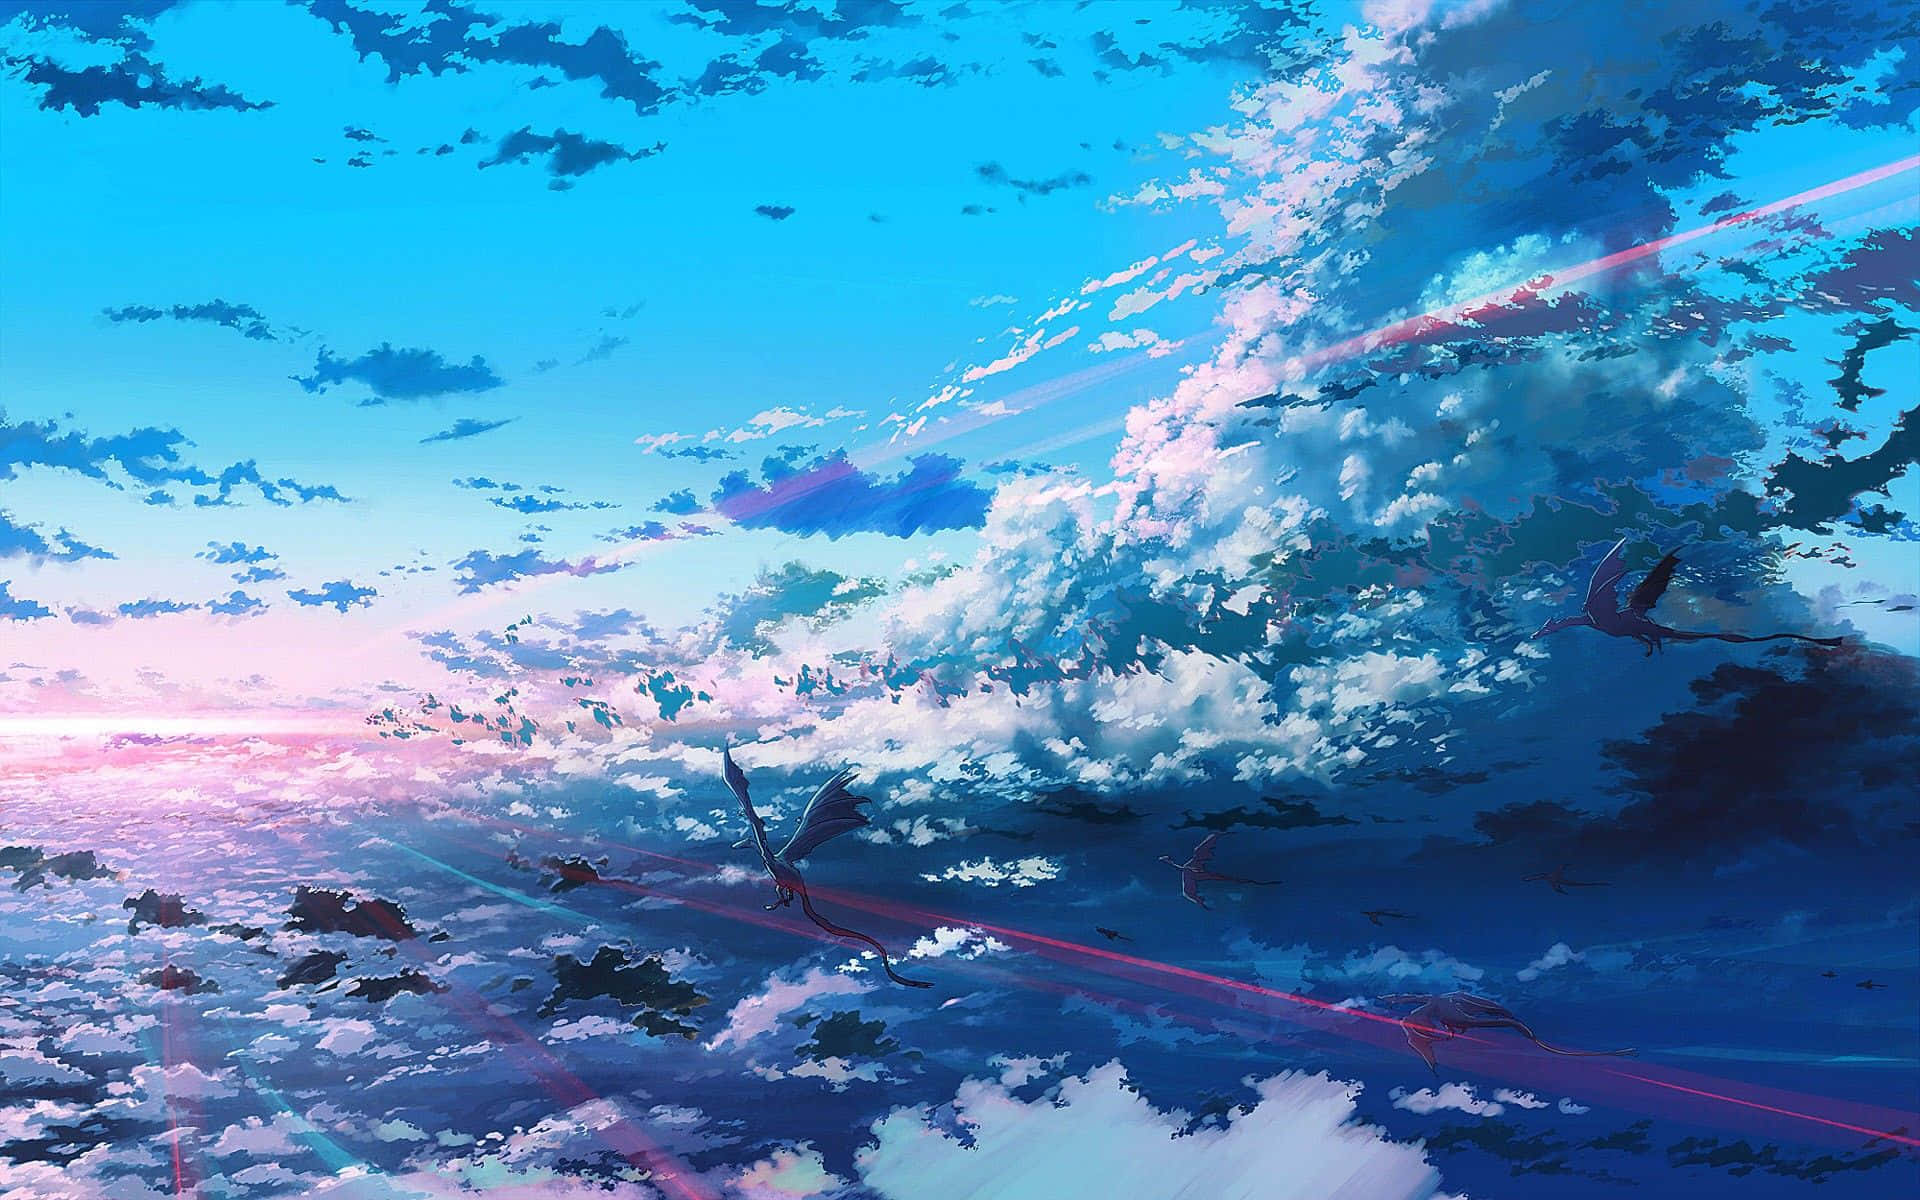 "Explore Endless Possibilities in the Fantastic World of Anime Art"